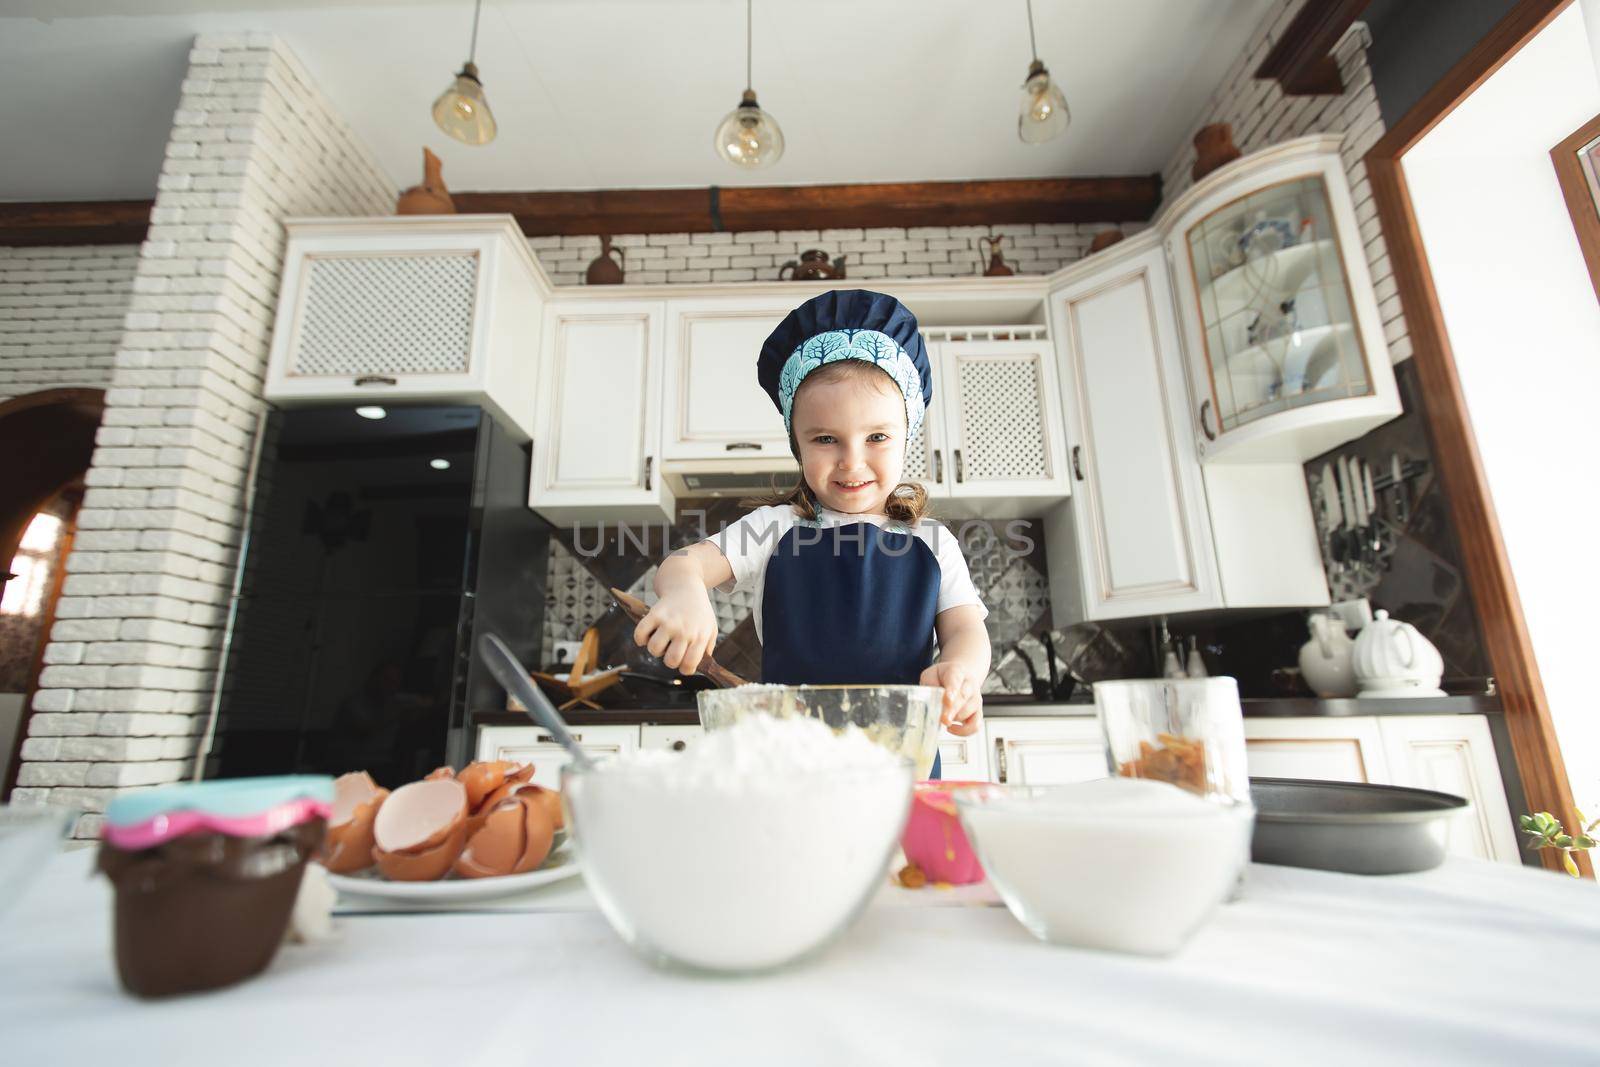 A cute little girl in an apron and a Chef's hat is stirring the dough with a wooden spatula, looking at the camera and smiling while cooking by StudioPeace